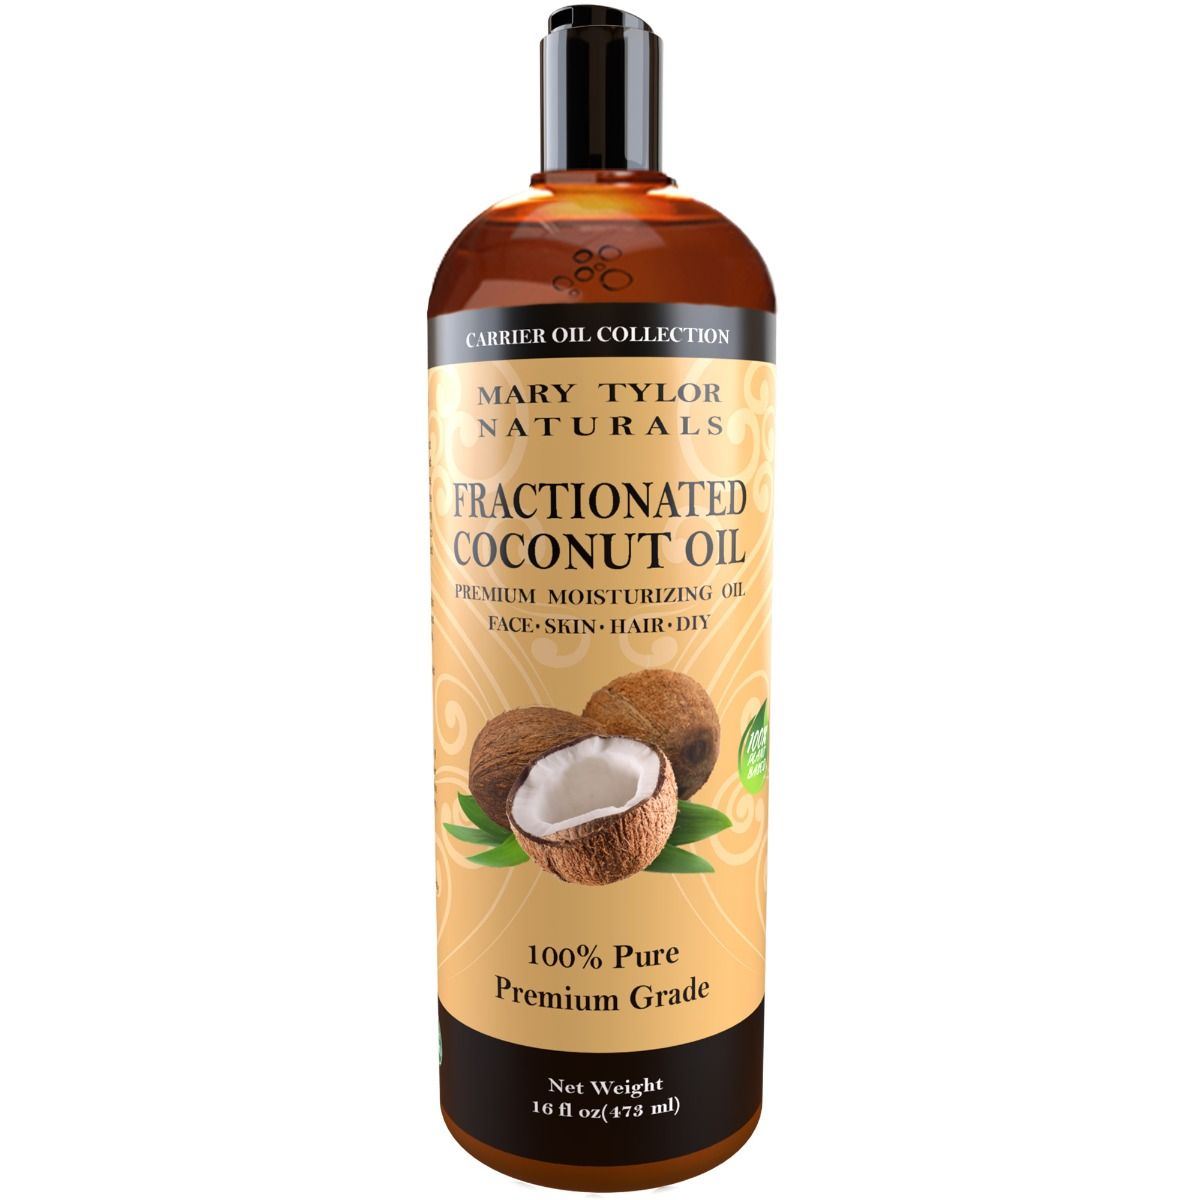 5 Unique Uses for Fractionated Coconut Oil